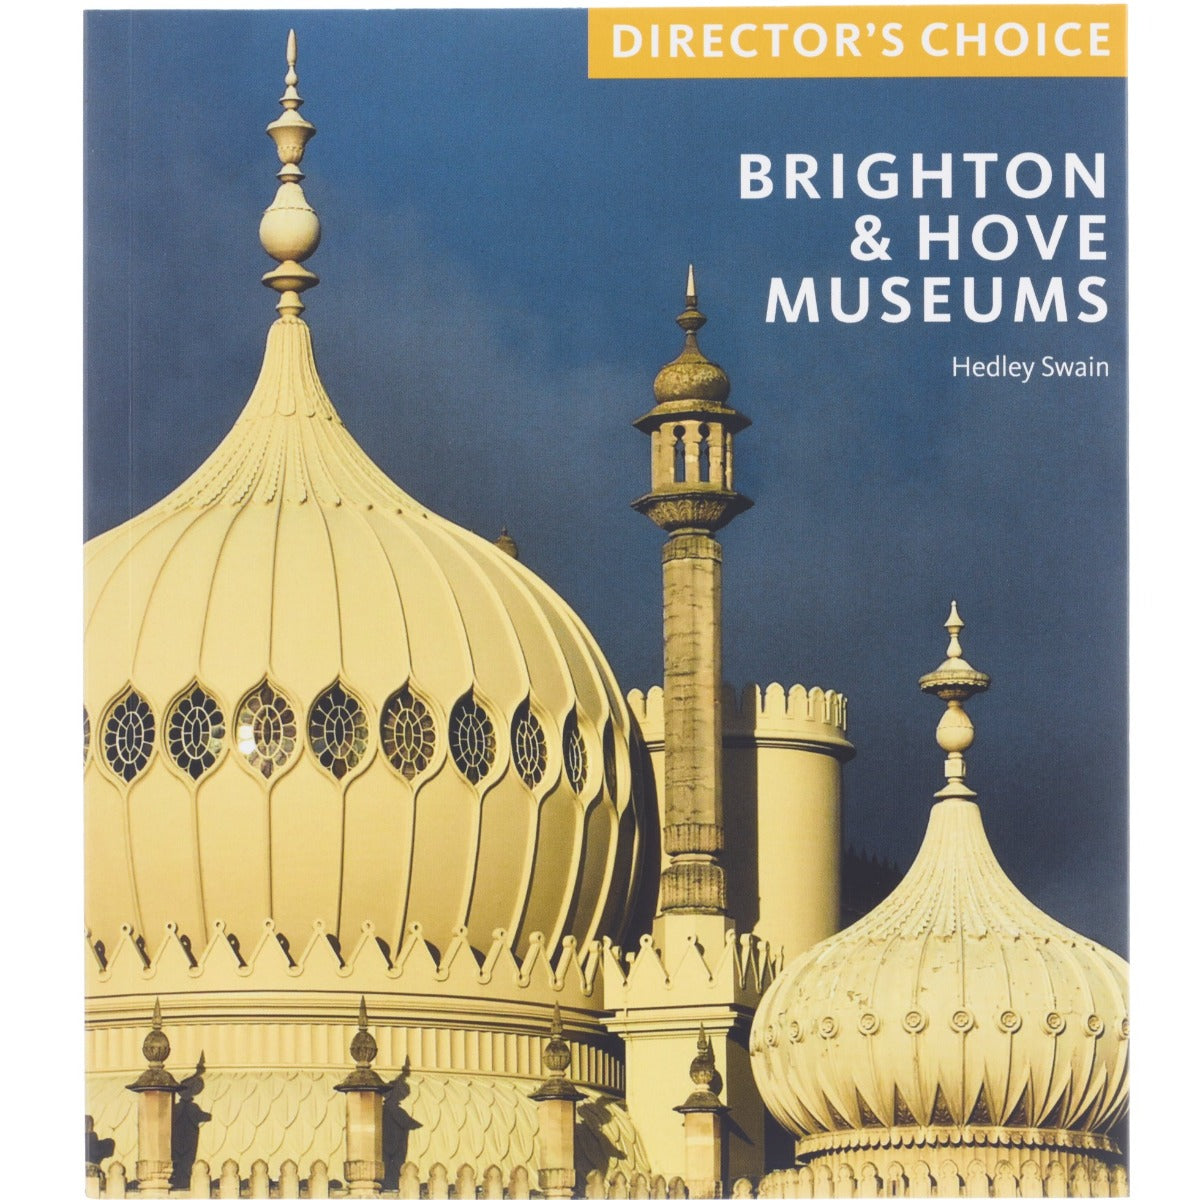 Directors Choice: Brighton & Hove Museums